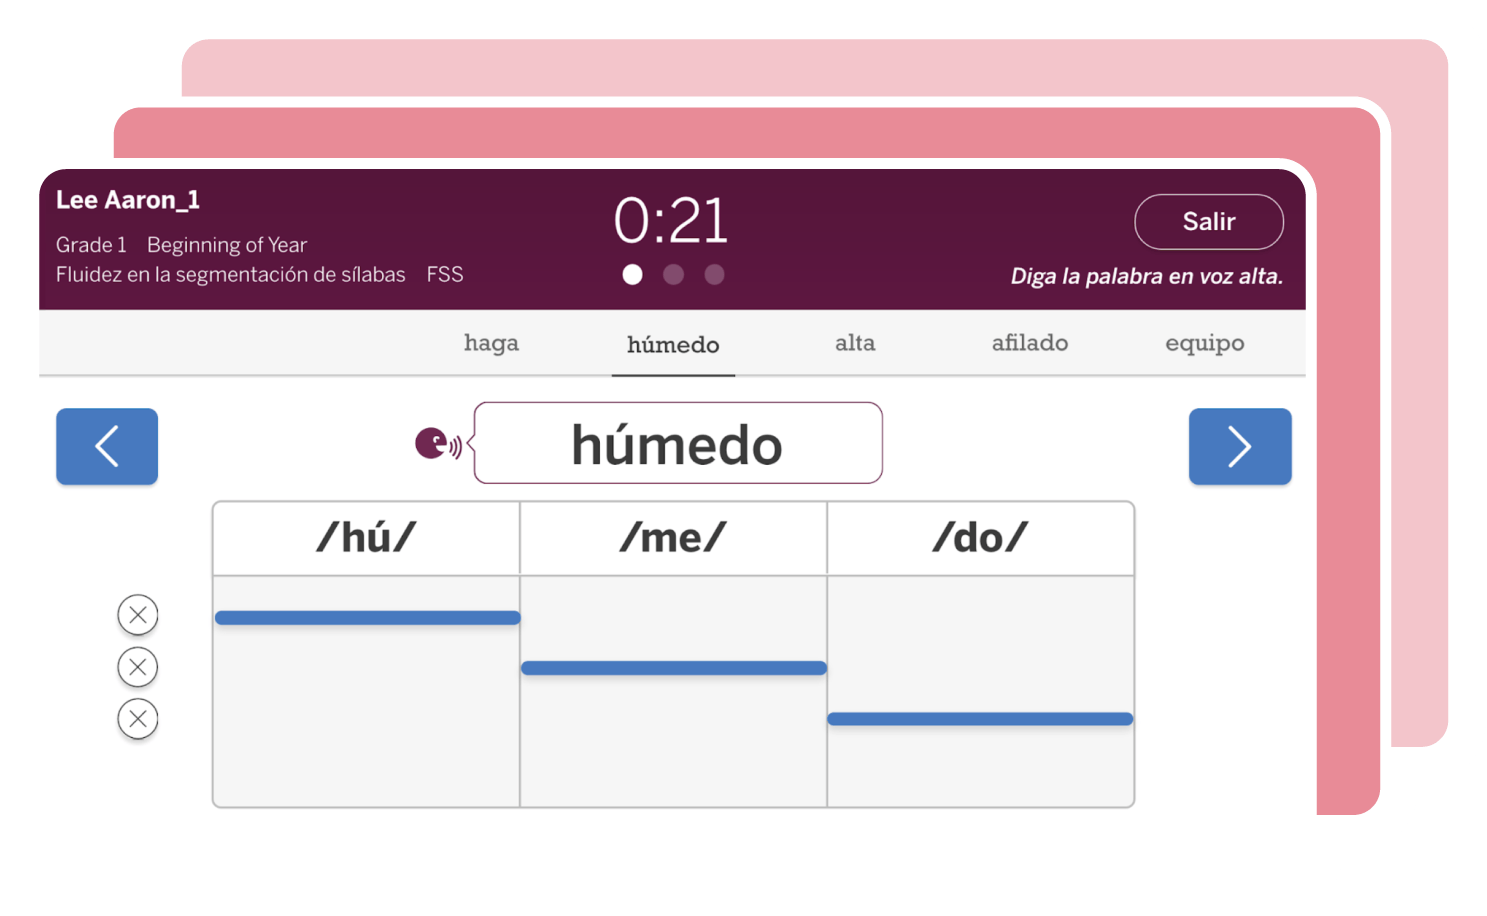 Educational software interface for personalized Spanish literacy instruction, showing a syllable segmentation exercise for the word 